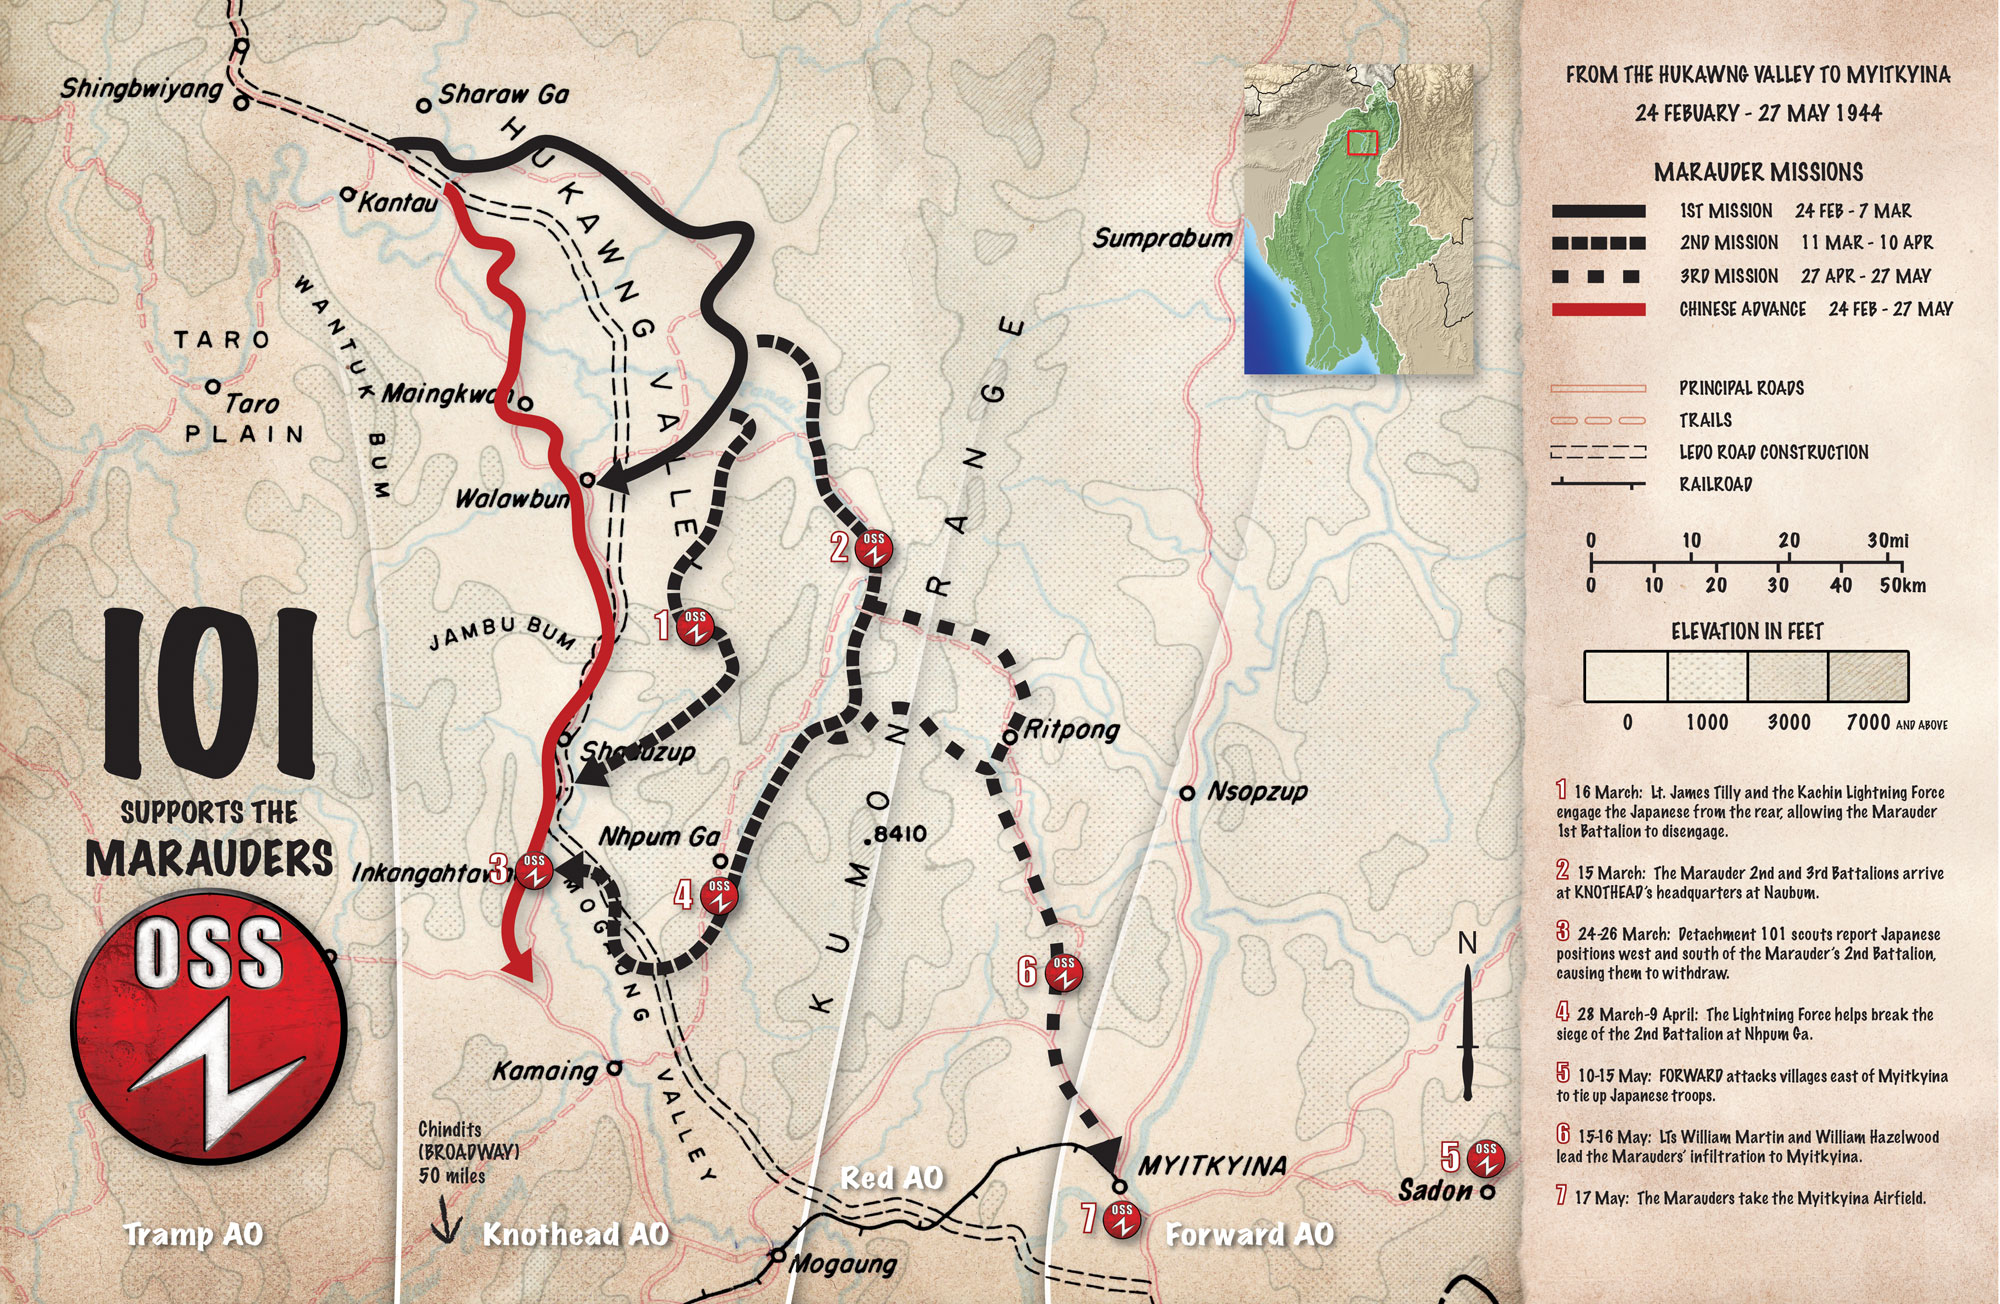 MAP: From the Hukawng Valley to Myitkyina, 24 February - 27 May 1944